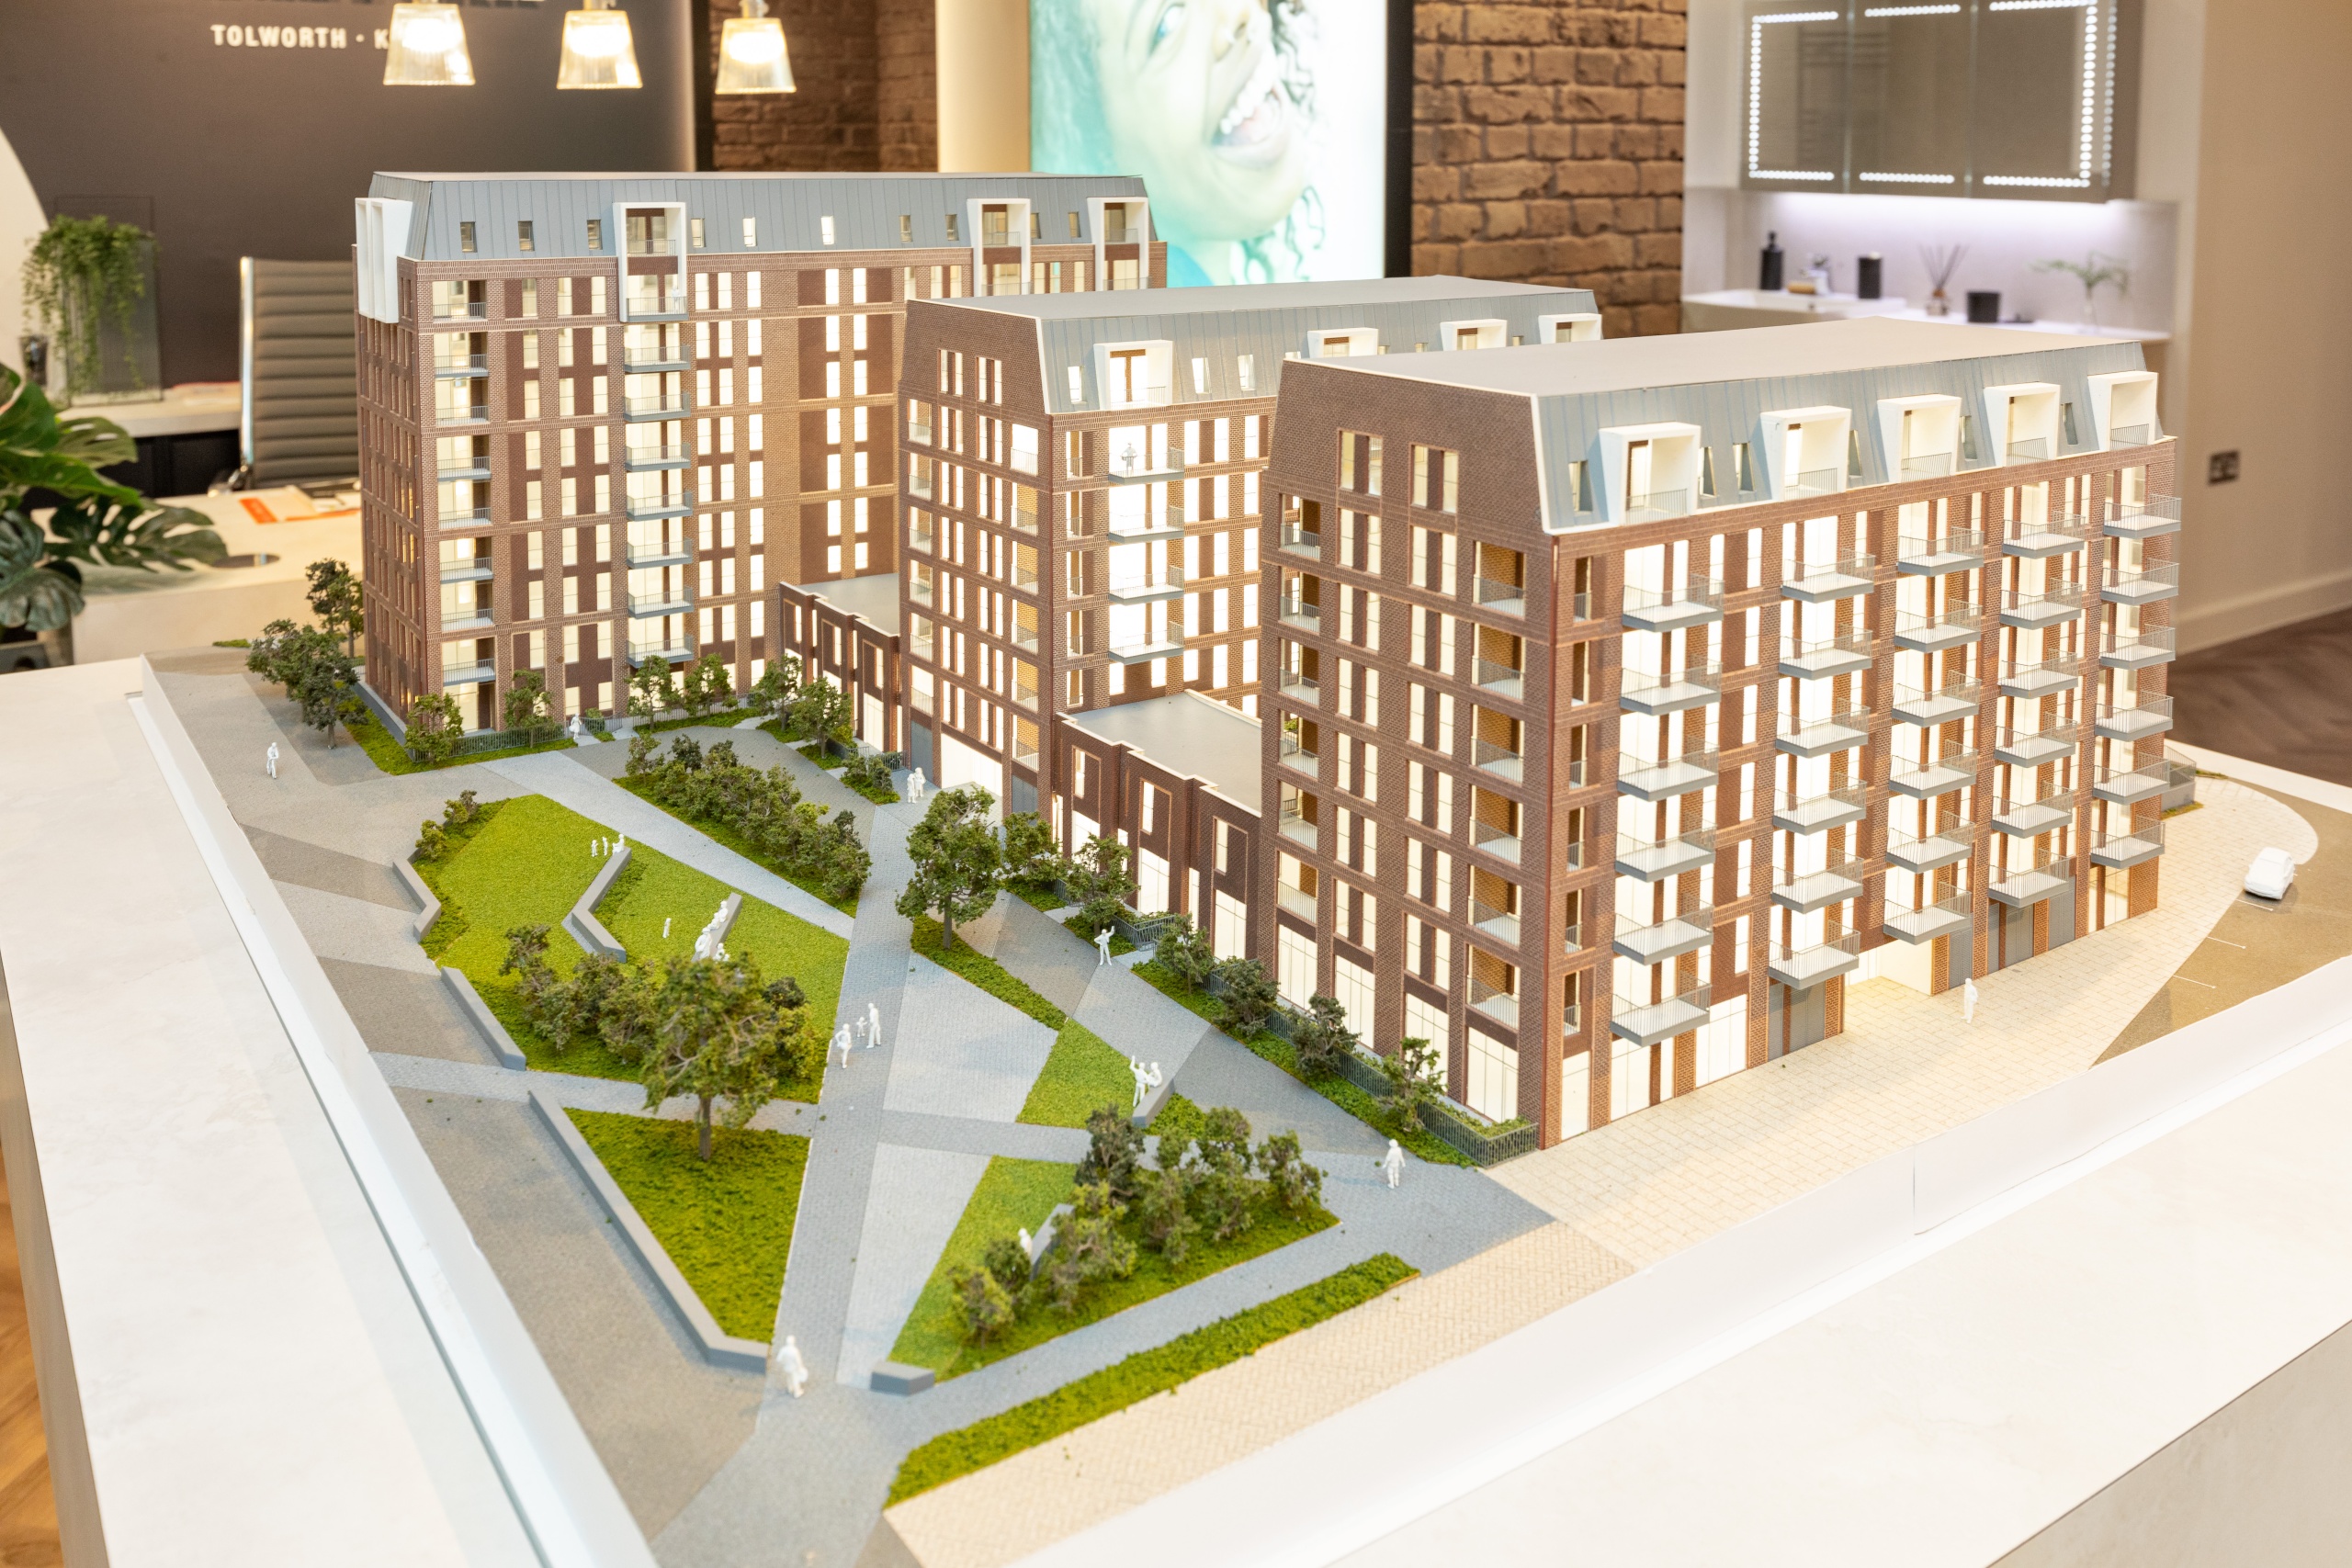 Large 3D model of an apartment complex and the communal gardens around it